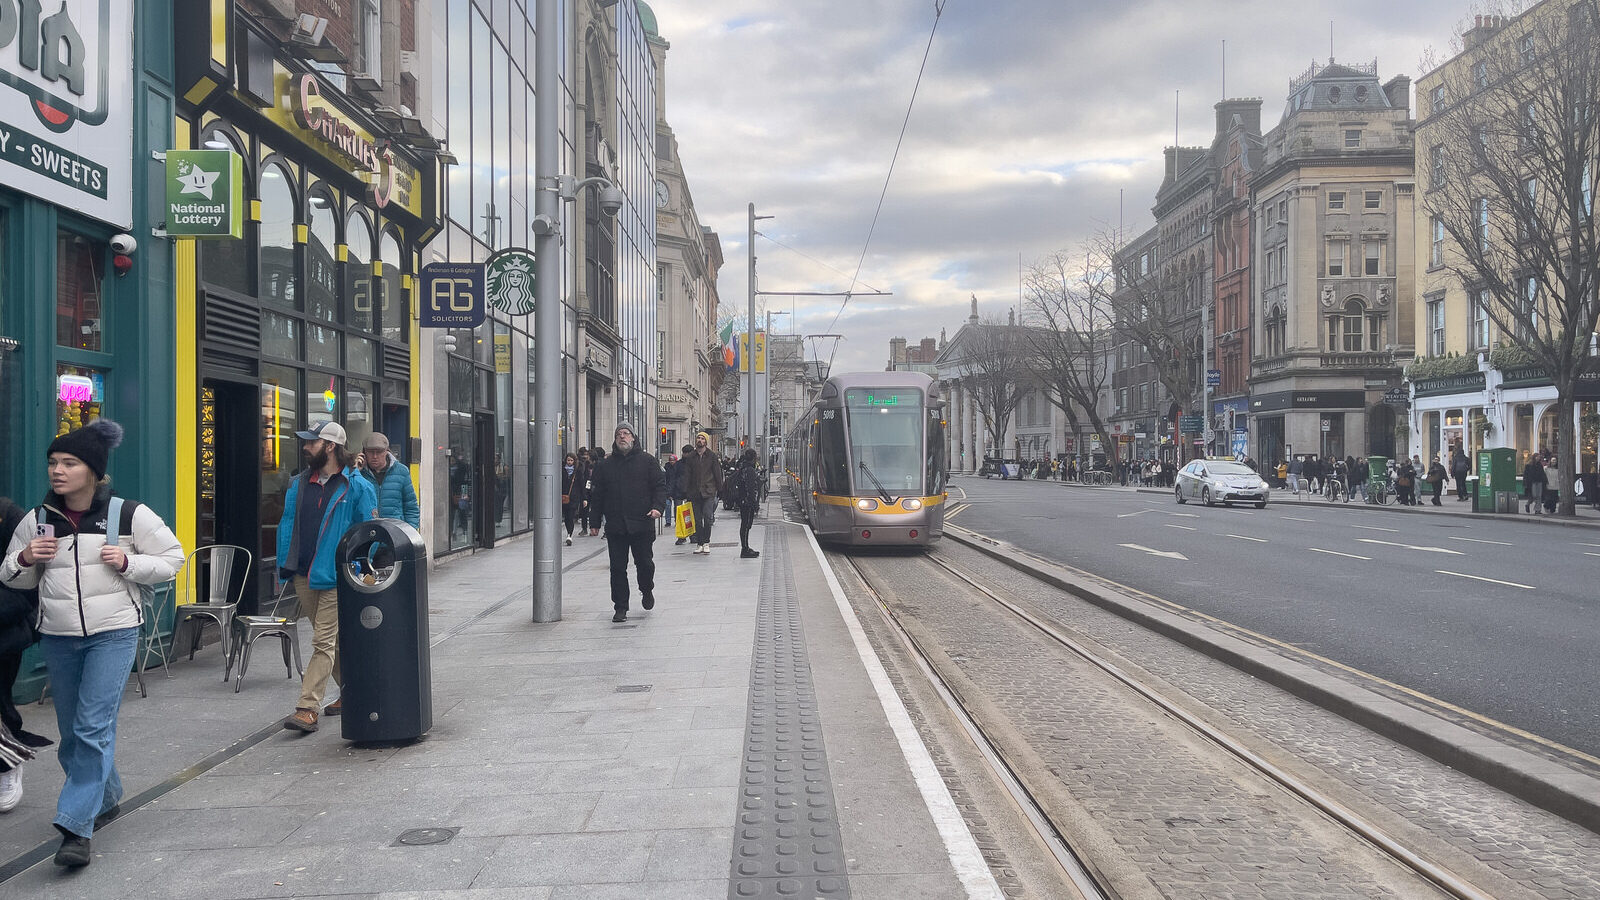 WESTMORELAND STREET IN DUBLIN [NAMED AFTER JOHN FANE THE 10th EARL OF WESTMORELAND]-229570-1